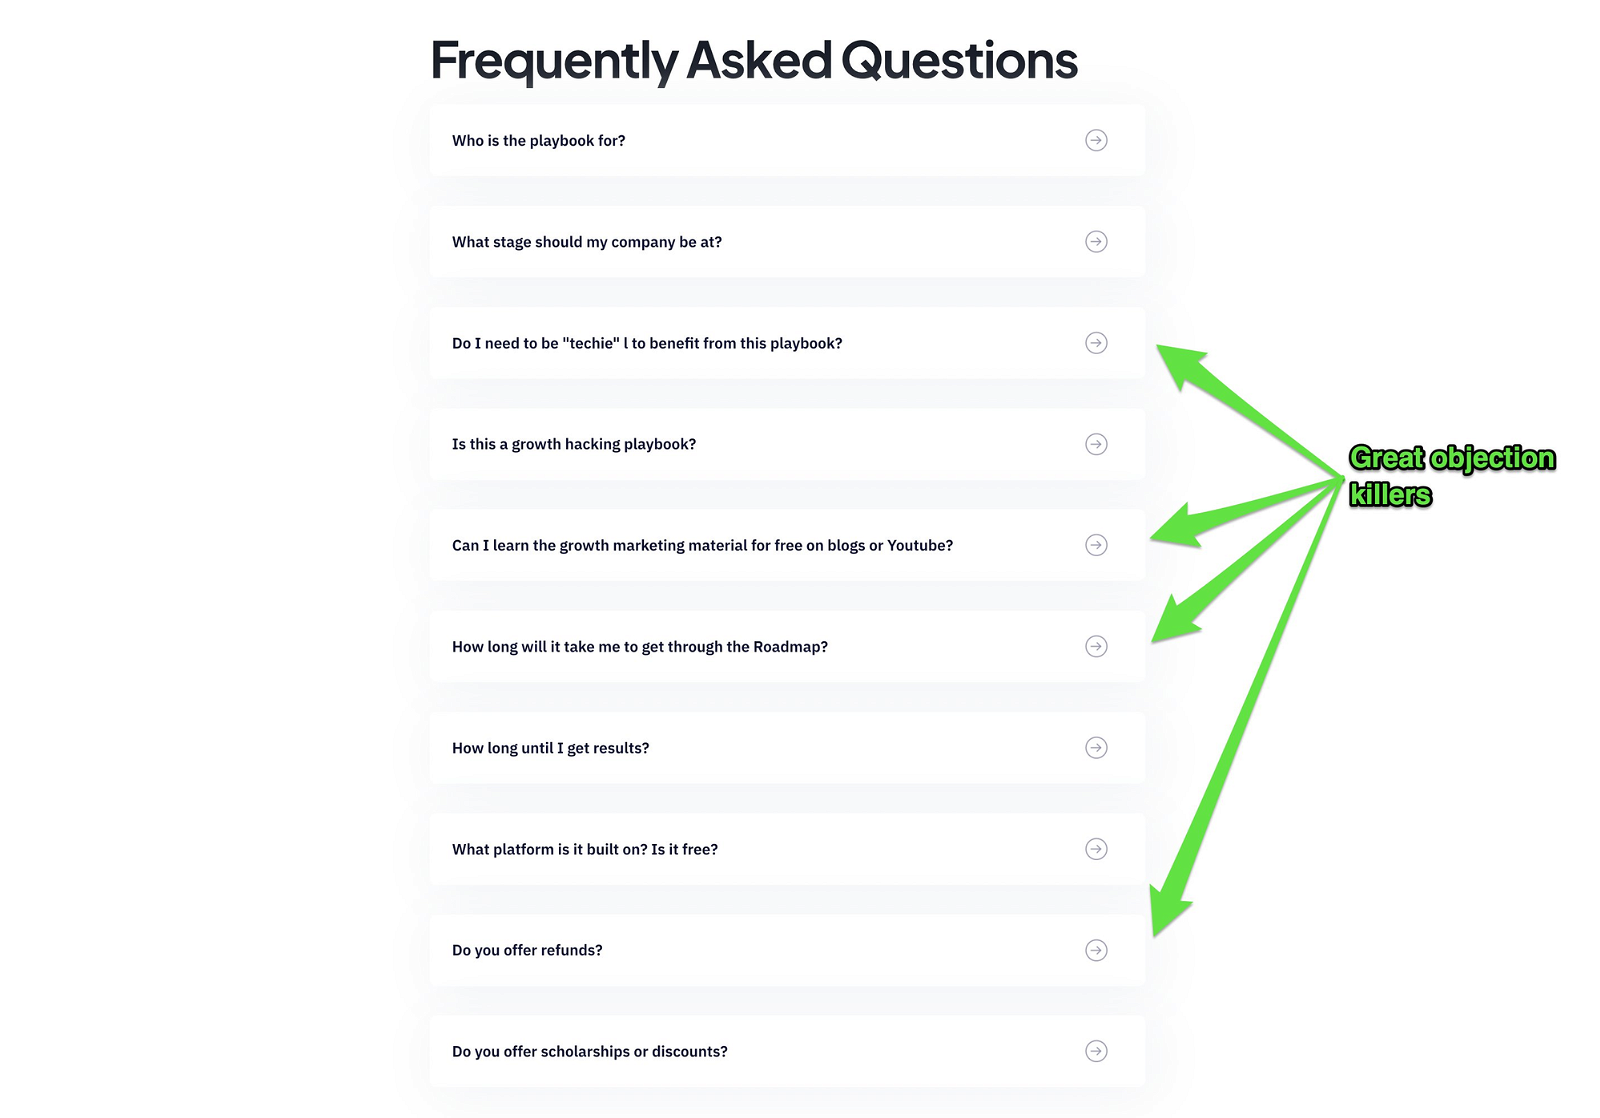 Another FAQ section example handling some common objections.